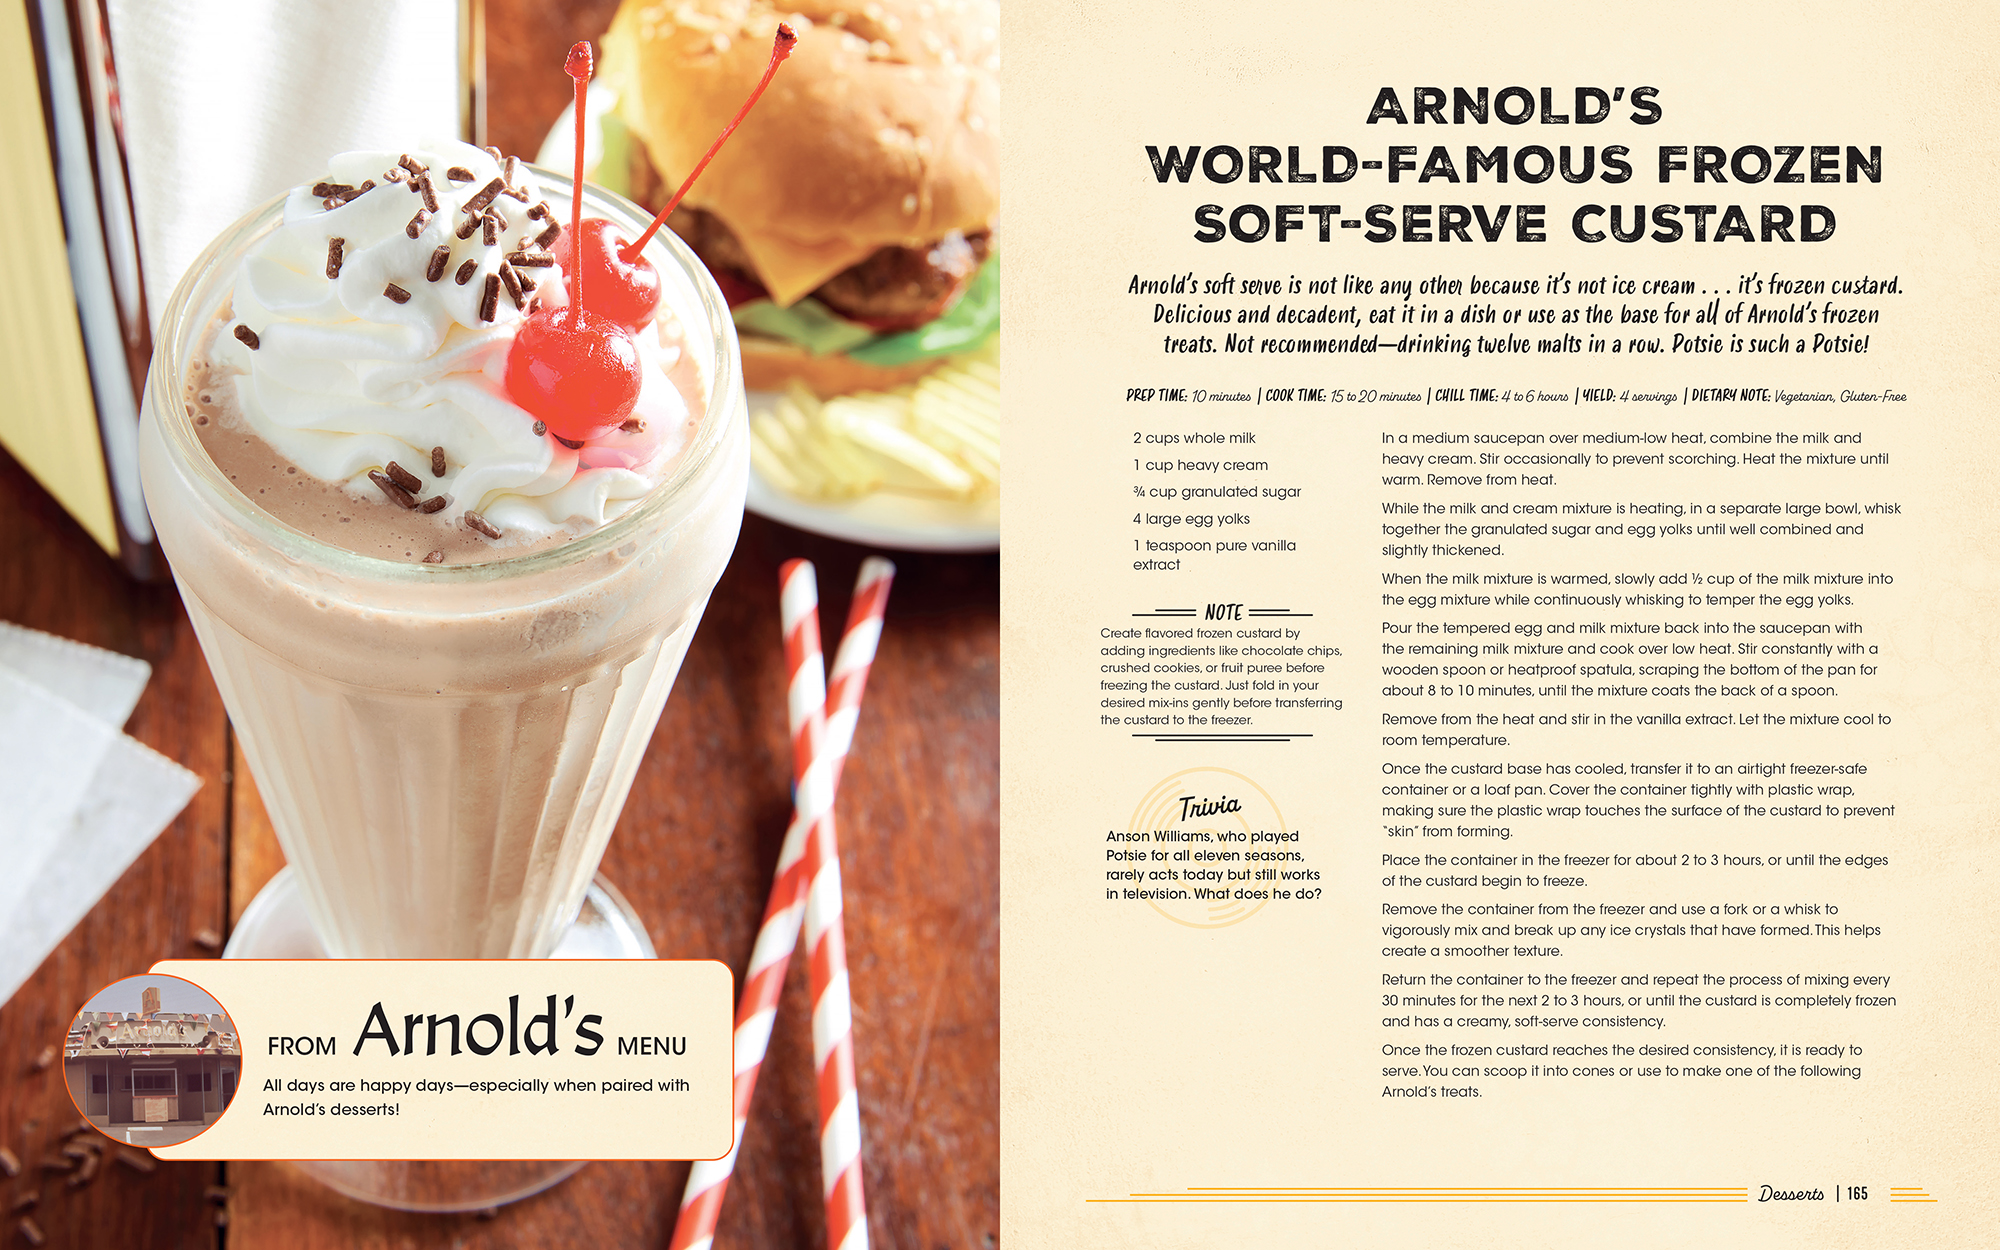 two-page spread from "Happy Days: The Official Cookbook." on the left page is a large picture of a malt with whipped cream, sprinkles and cherries on top, with a large label on it reading: From Arnold's Menu. The right page offers a recipe for Arnold's World-Famous Frozen Soft-Serve Custard